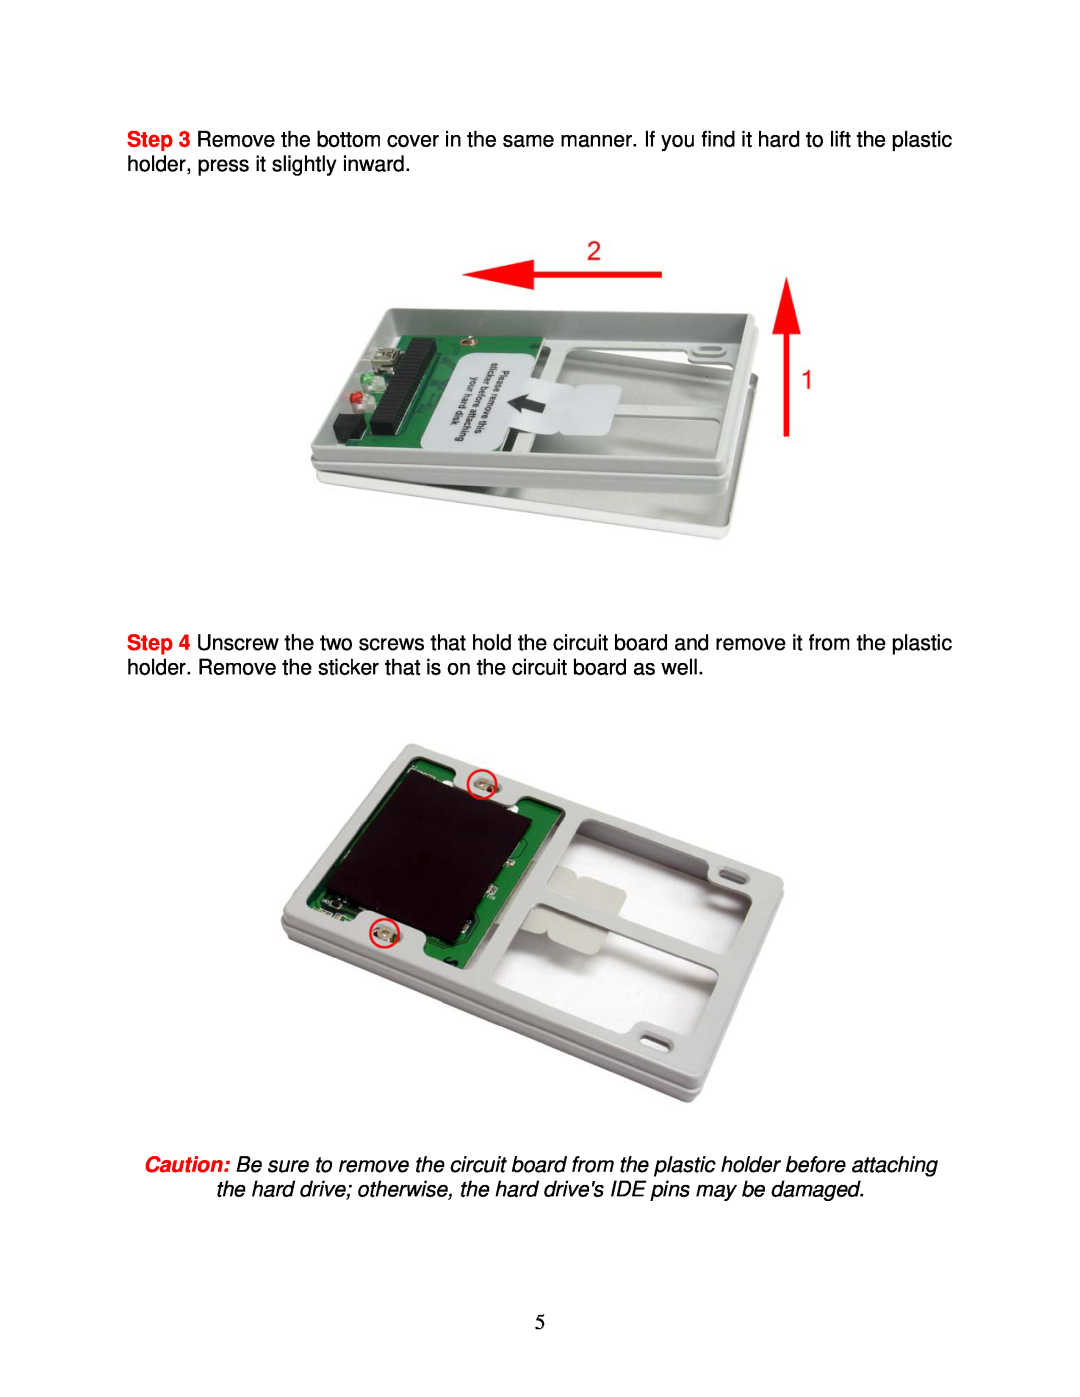 Airlink101 AEN-U25W user manual the hard drive otherwise, the hard drives IDE pins may be damaged 